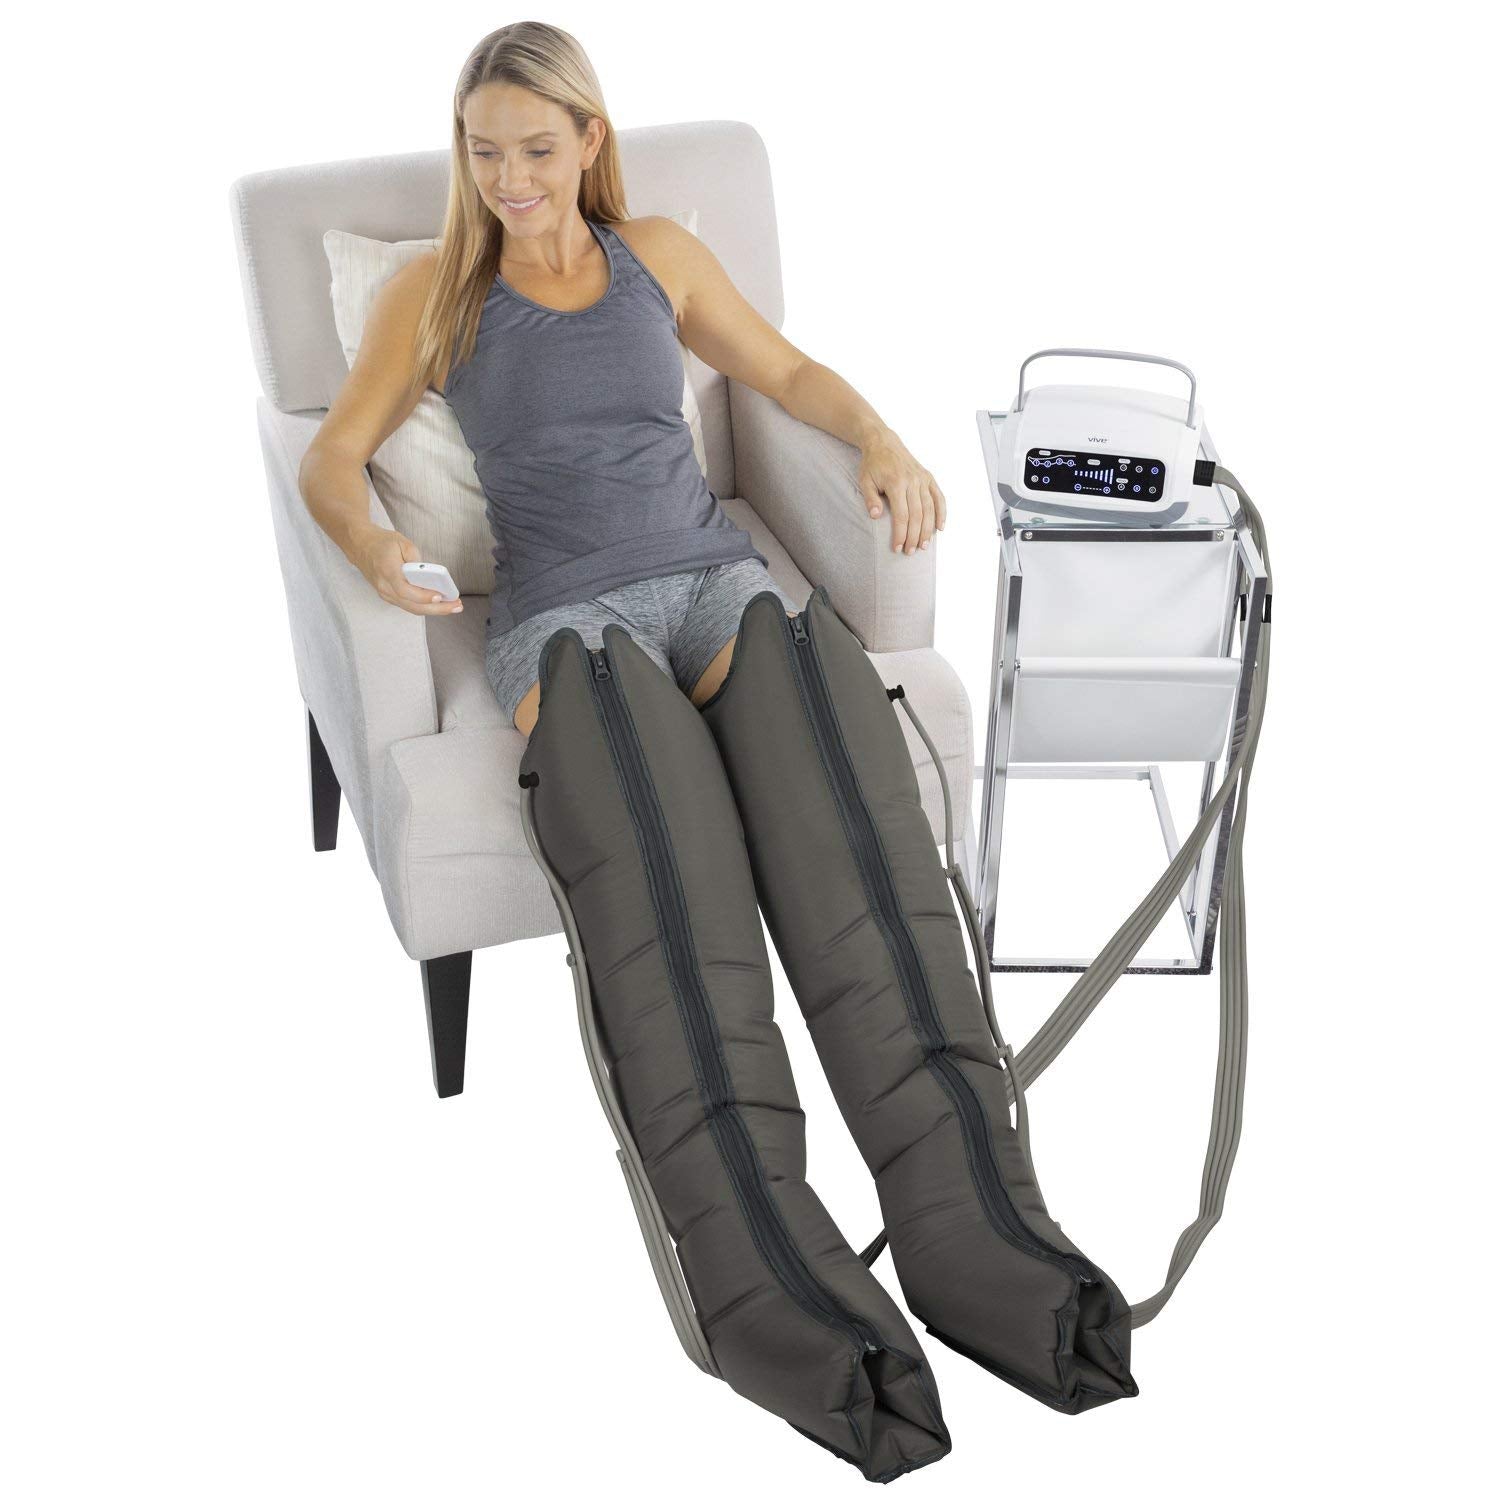 Sequential Compression Device - Leg Pump Machine for Lymphedema